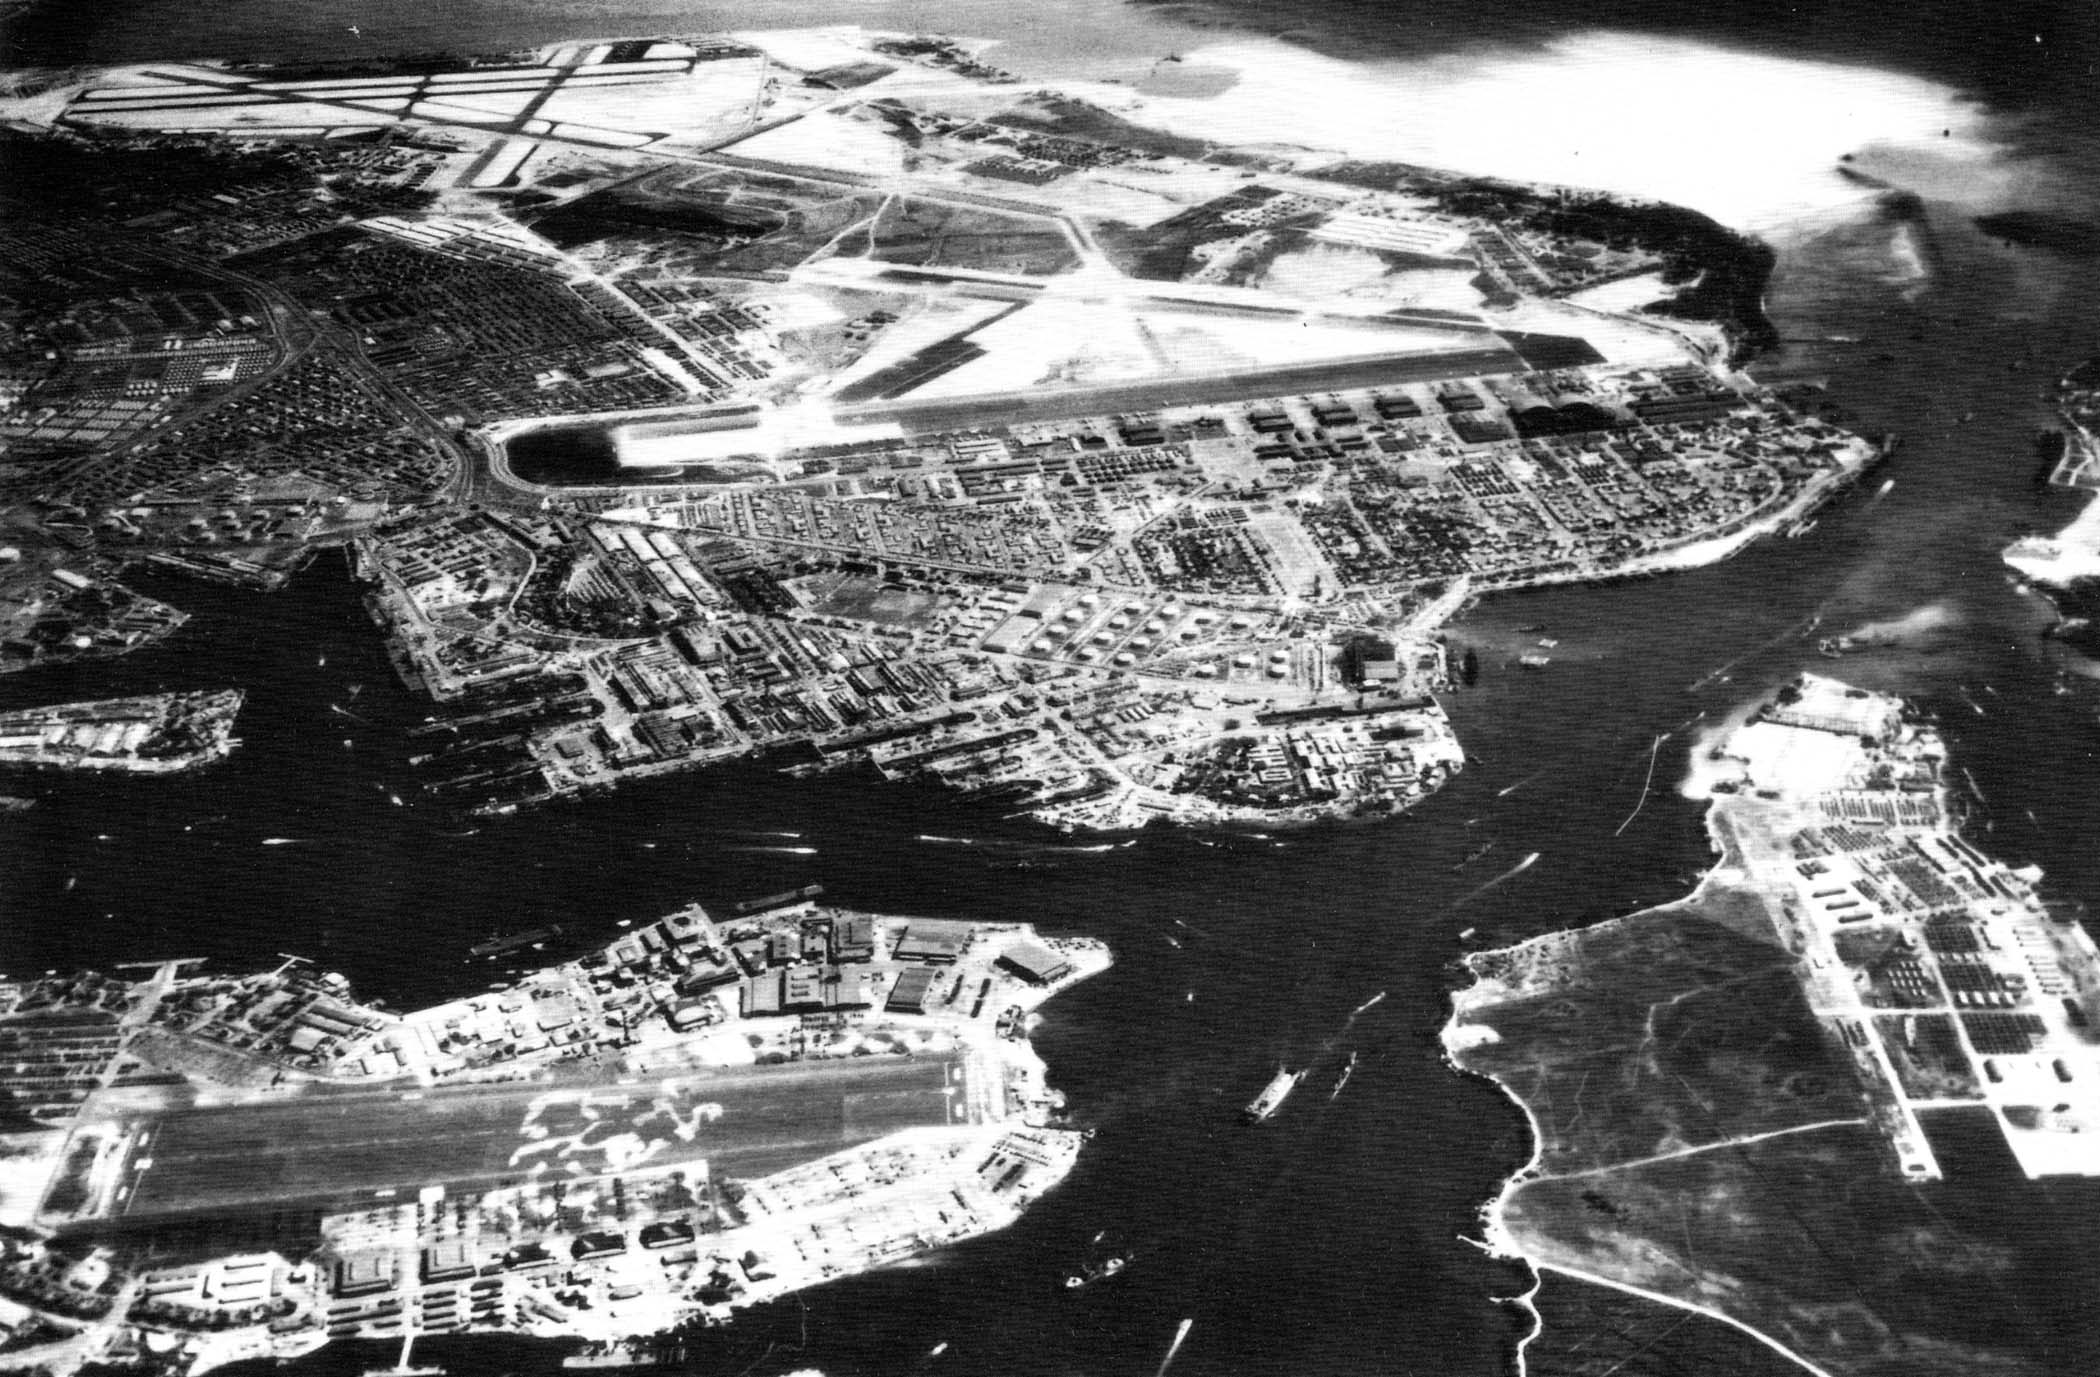 Ford Island, Pearl Harbor shipyard, Hickam Field, and Honolulu Naval Air Station, Oahu, Hawaii, Feb 1945 (NAS Honolulu would later revert back to John Rodgers Airport and then become Honolulu Int’l Airport).